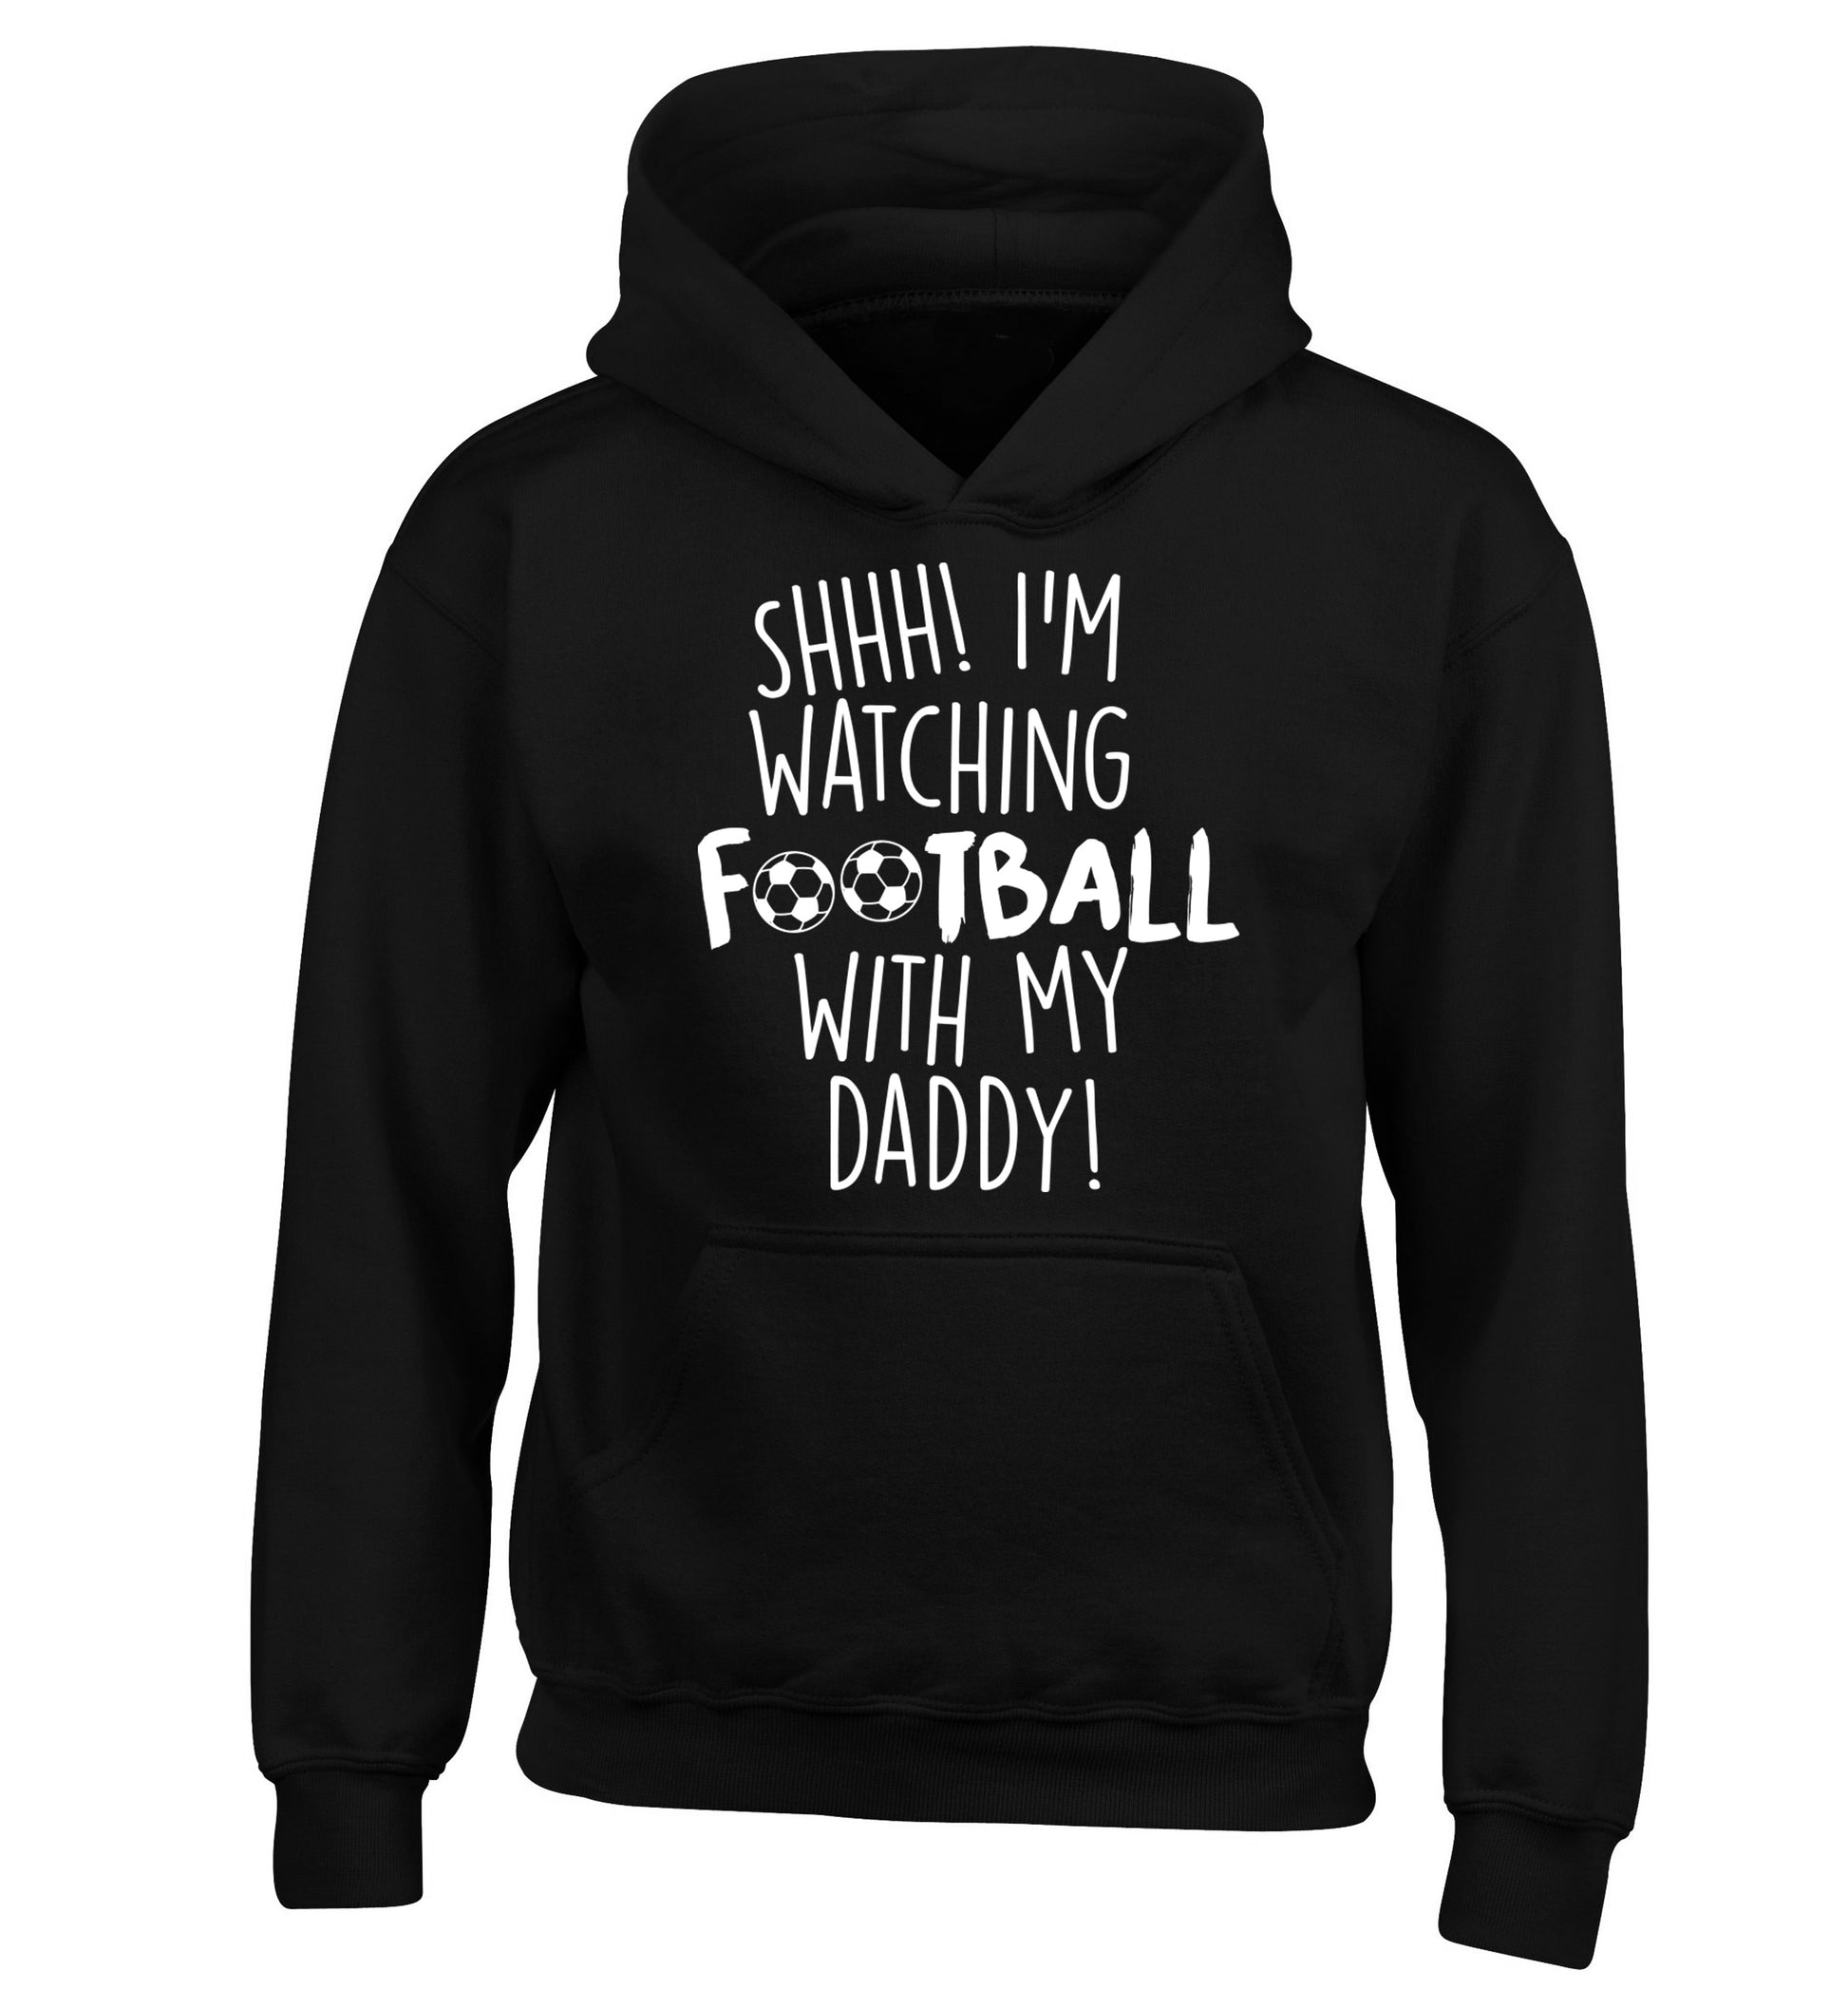 Shhh I'm watching football with my daddy children's black hoodie 12-14 Years